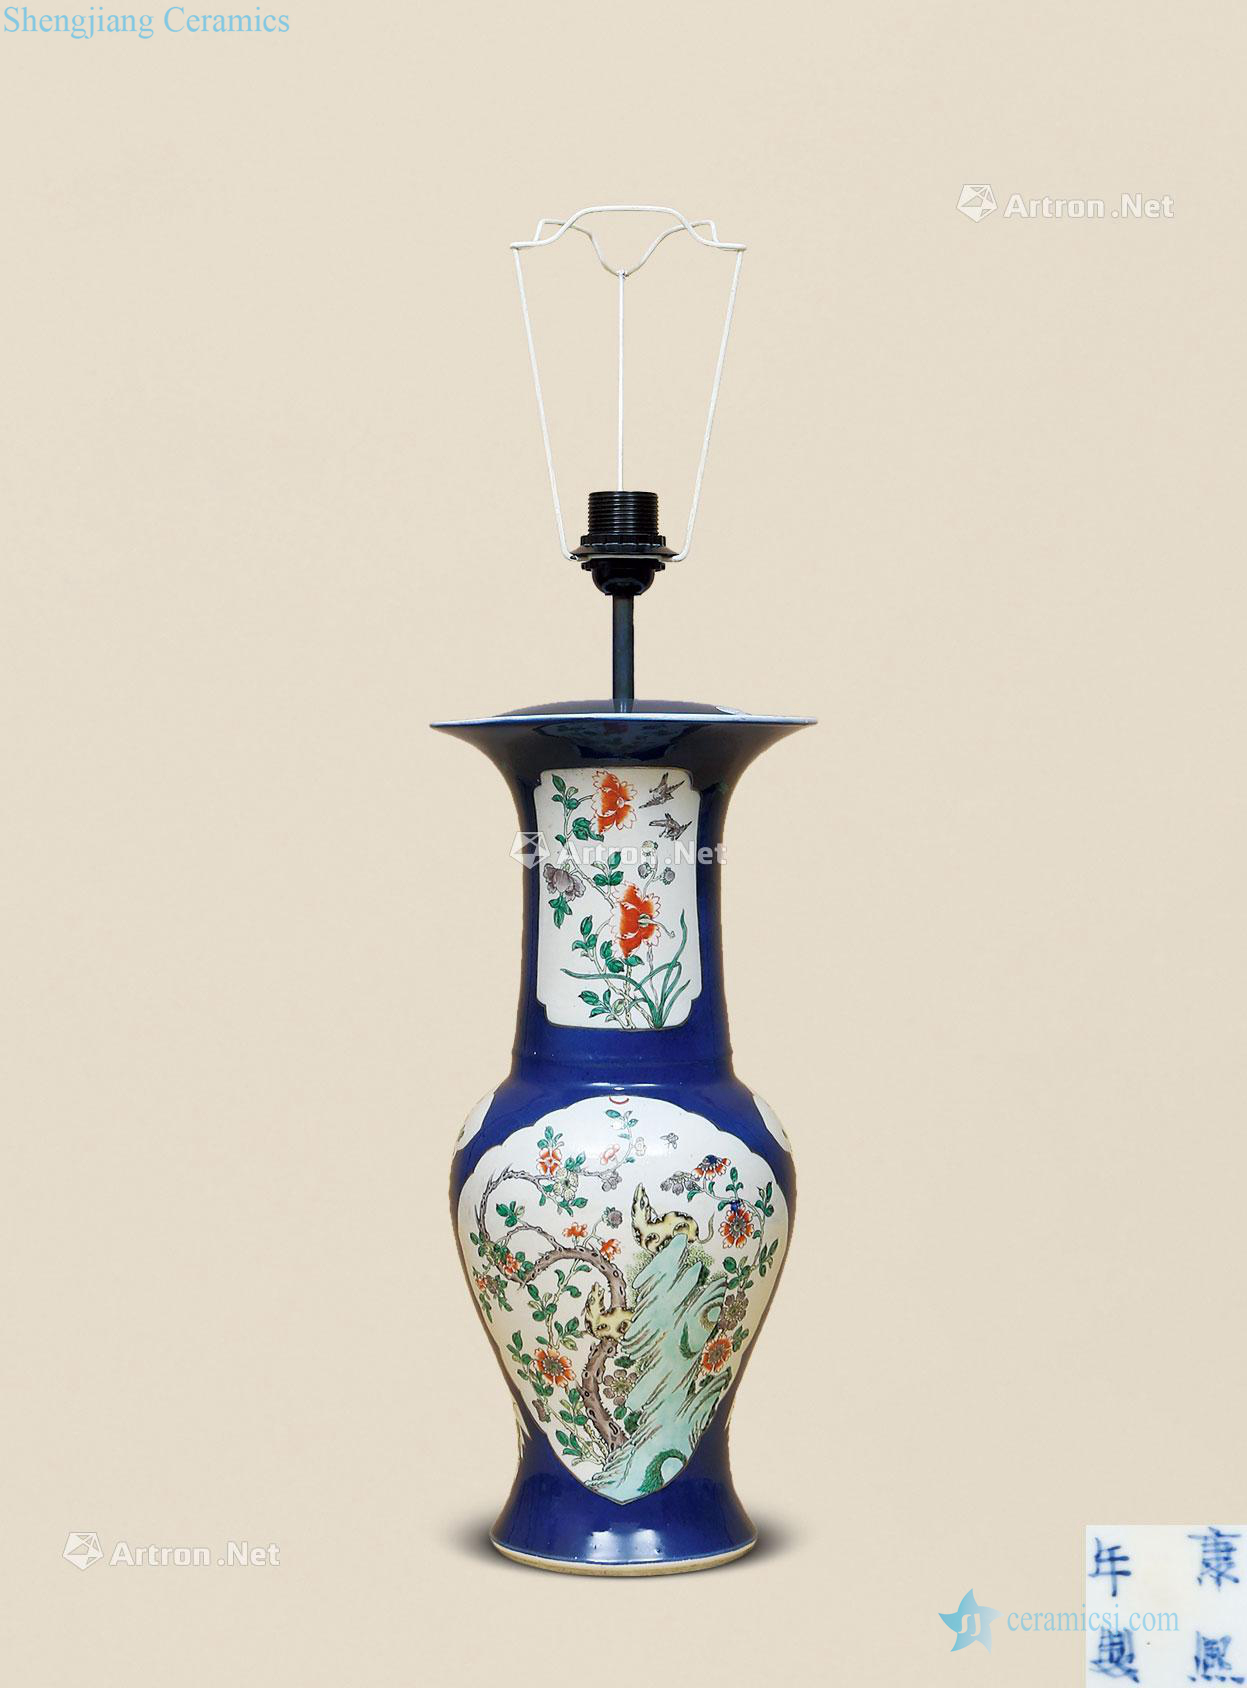 Qing guangxu Sprinkle the blue medallion grain flower vase with colorful painting of flowers and birds